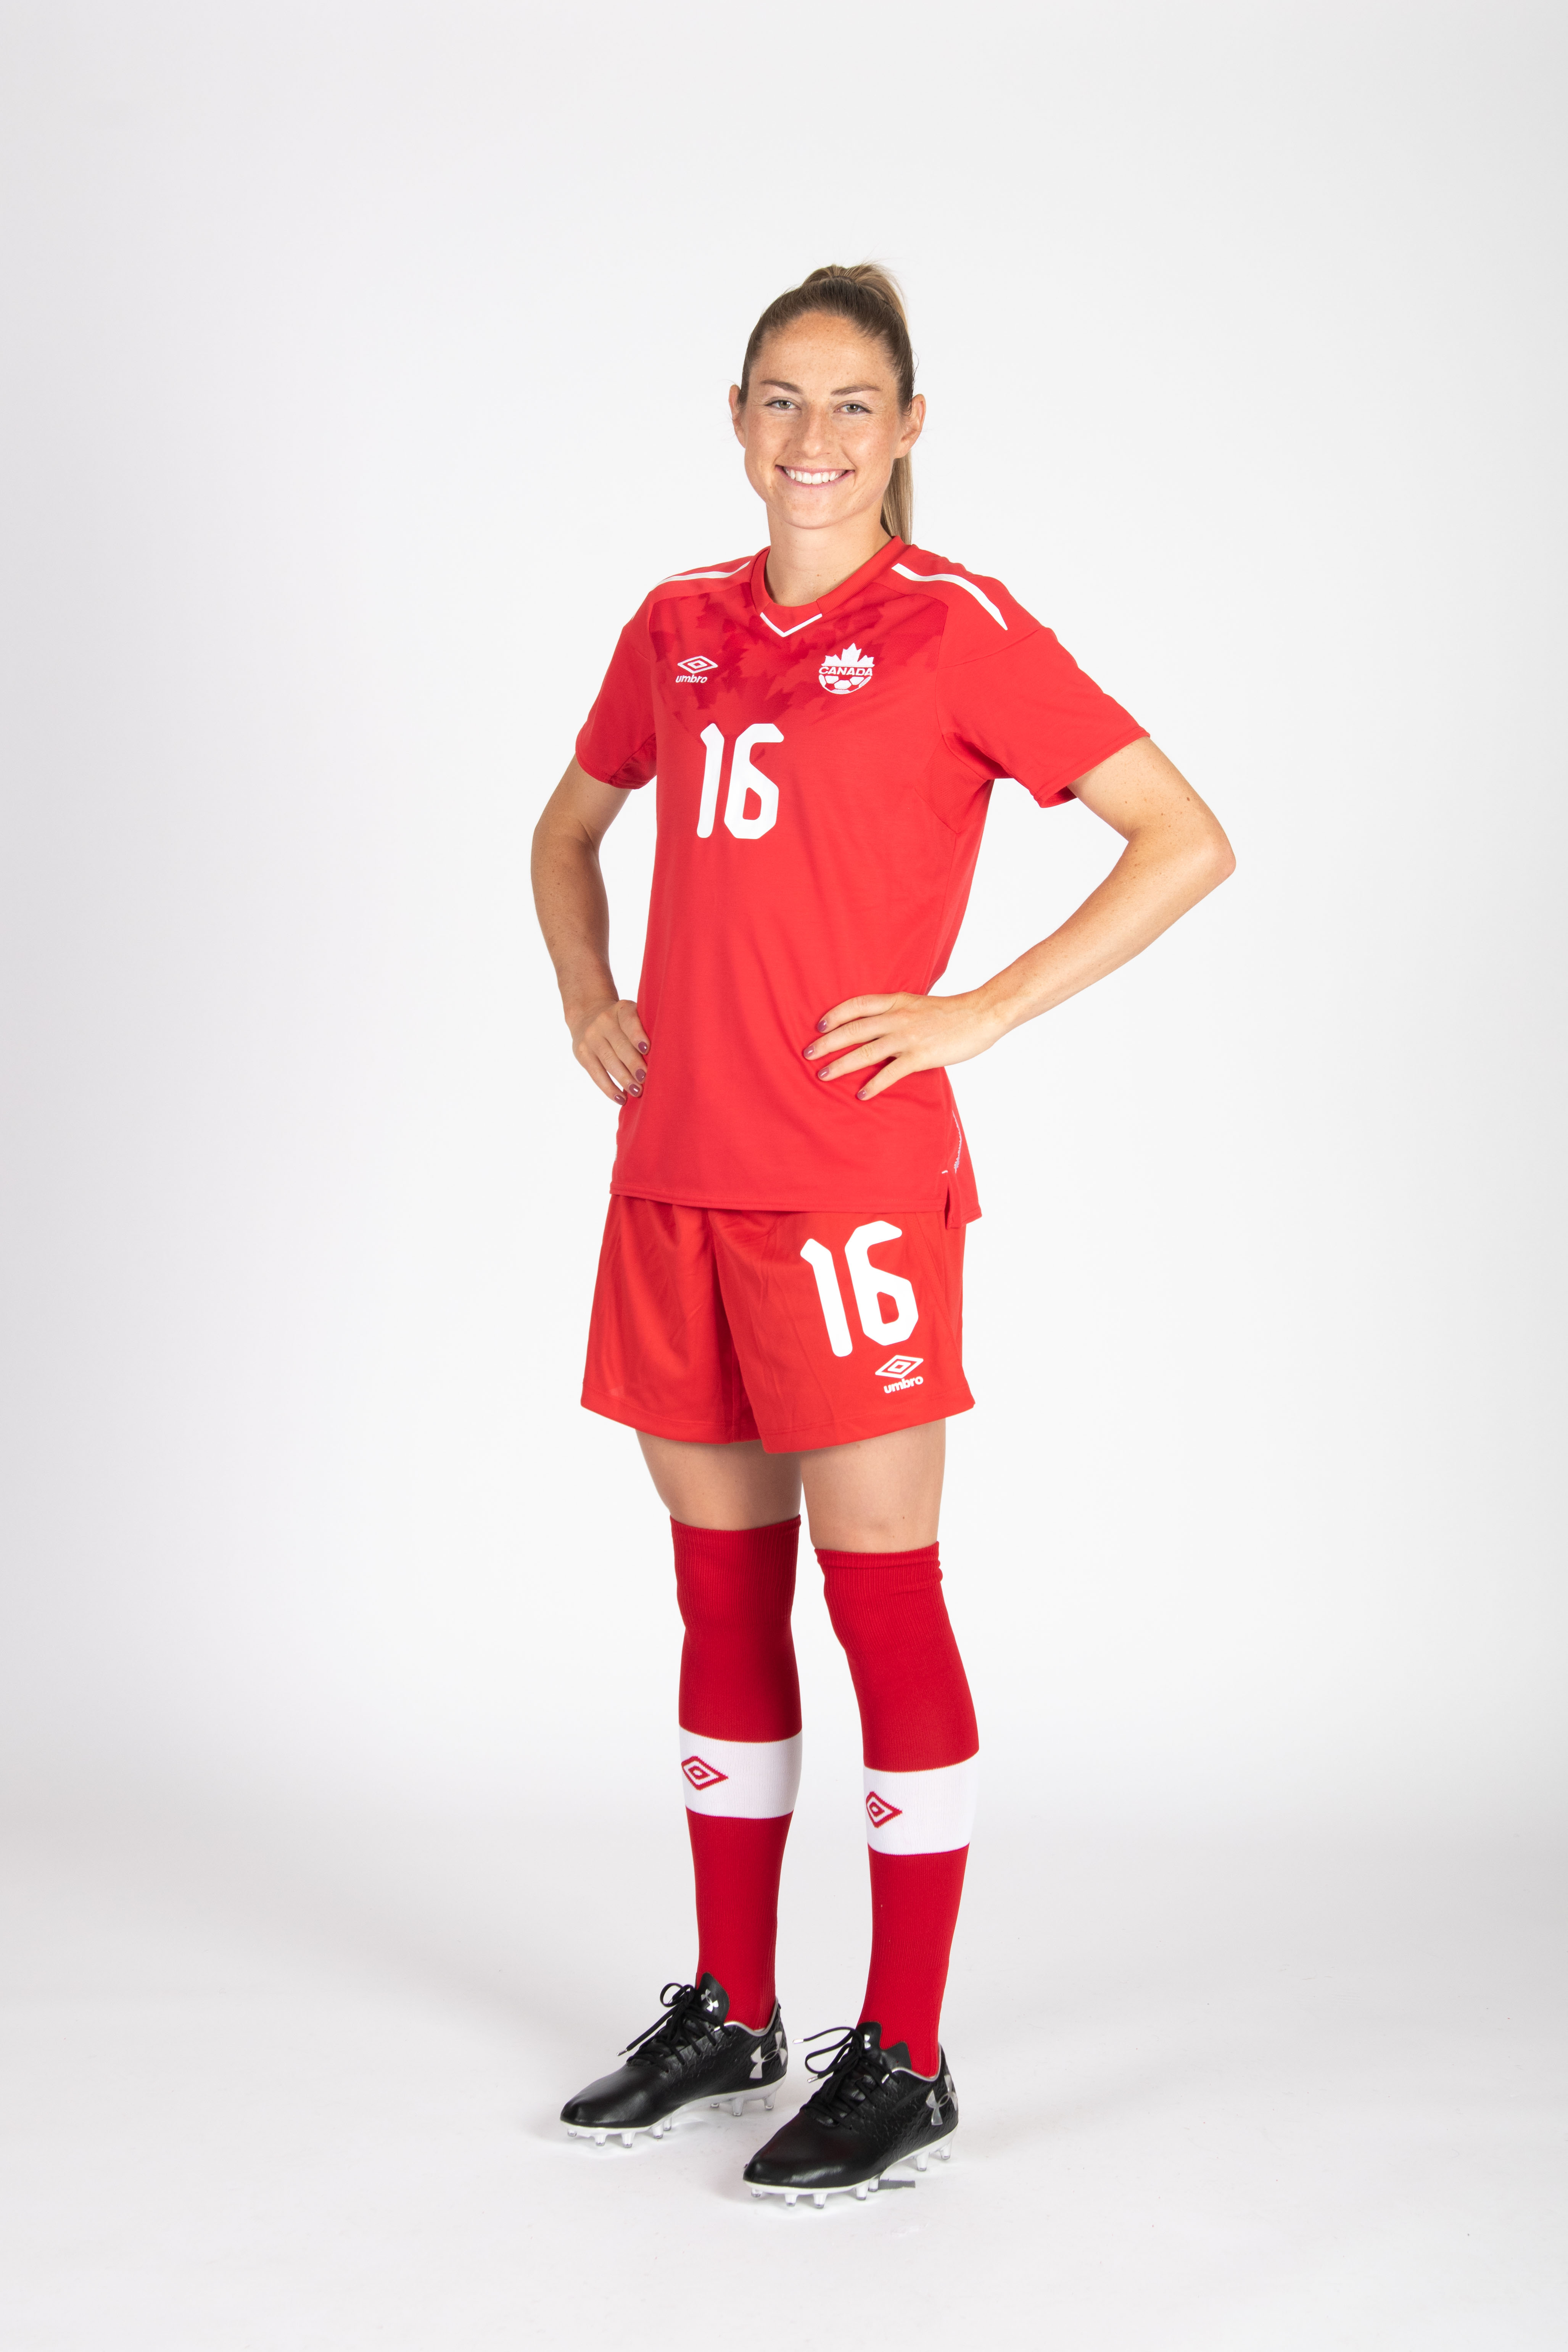 20180604_CANWNT_Beckie_byBazyl24